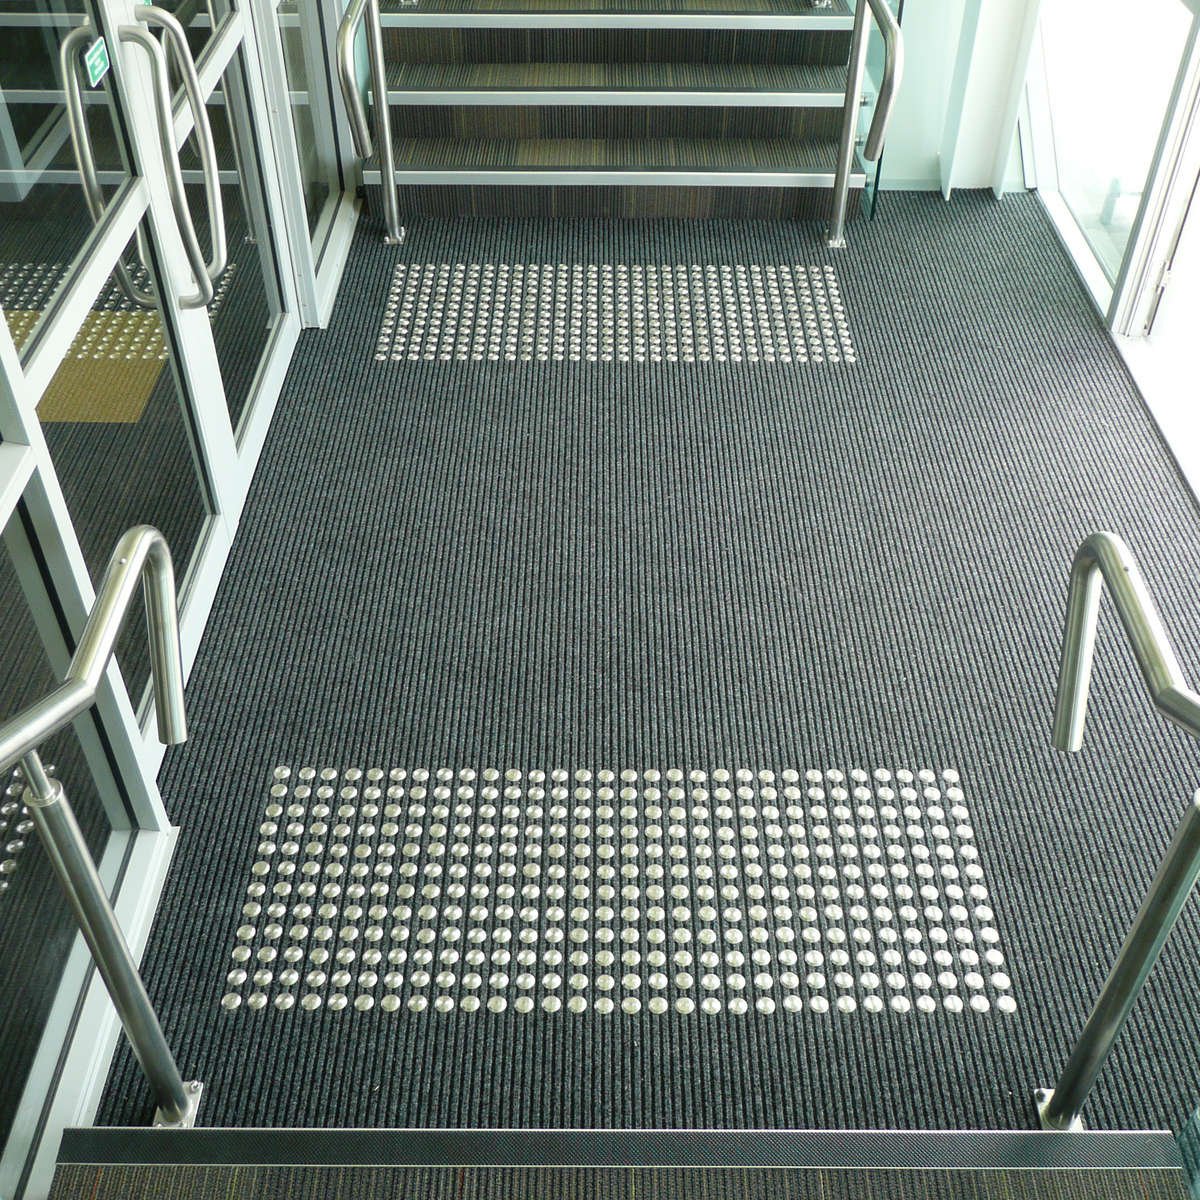 TacPro stainless steel tactile indicators on carpet in an entry foyer at the bottom of stairs